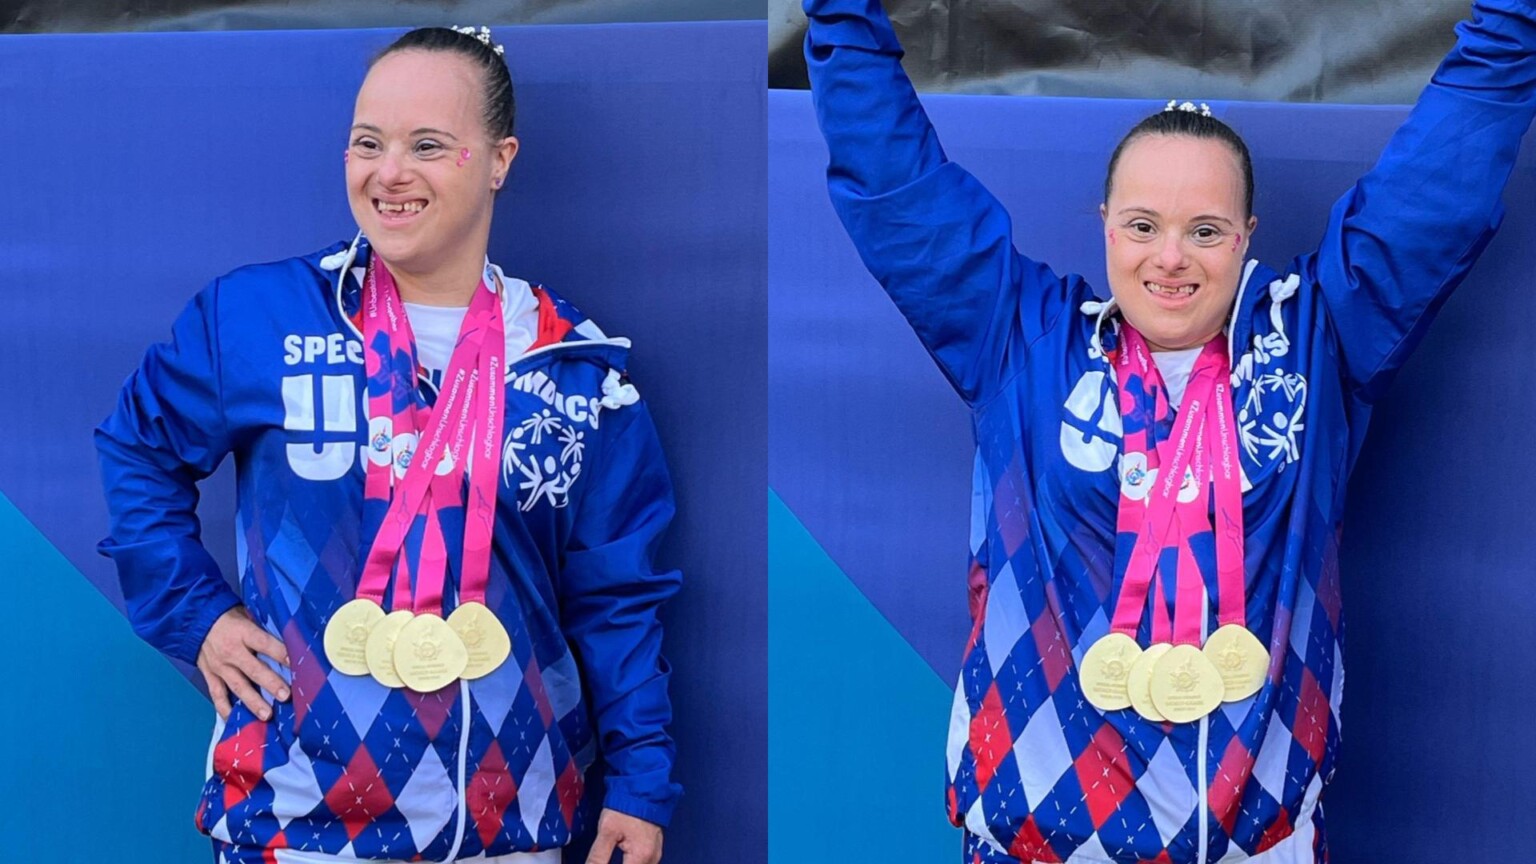 Dockins bringing home 5 gold medals in Special Olympics World Summer